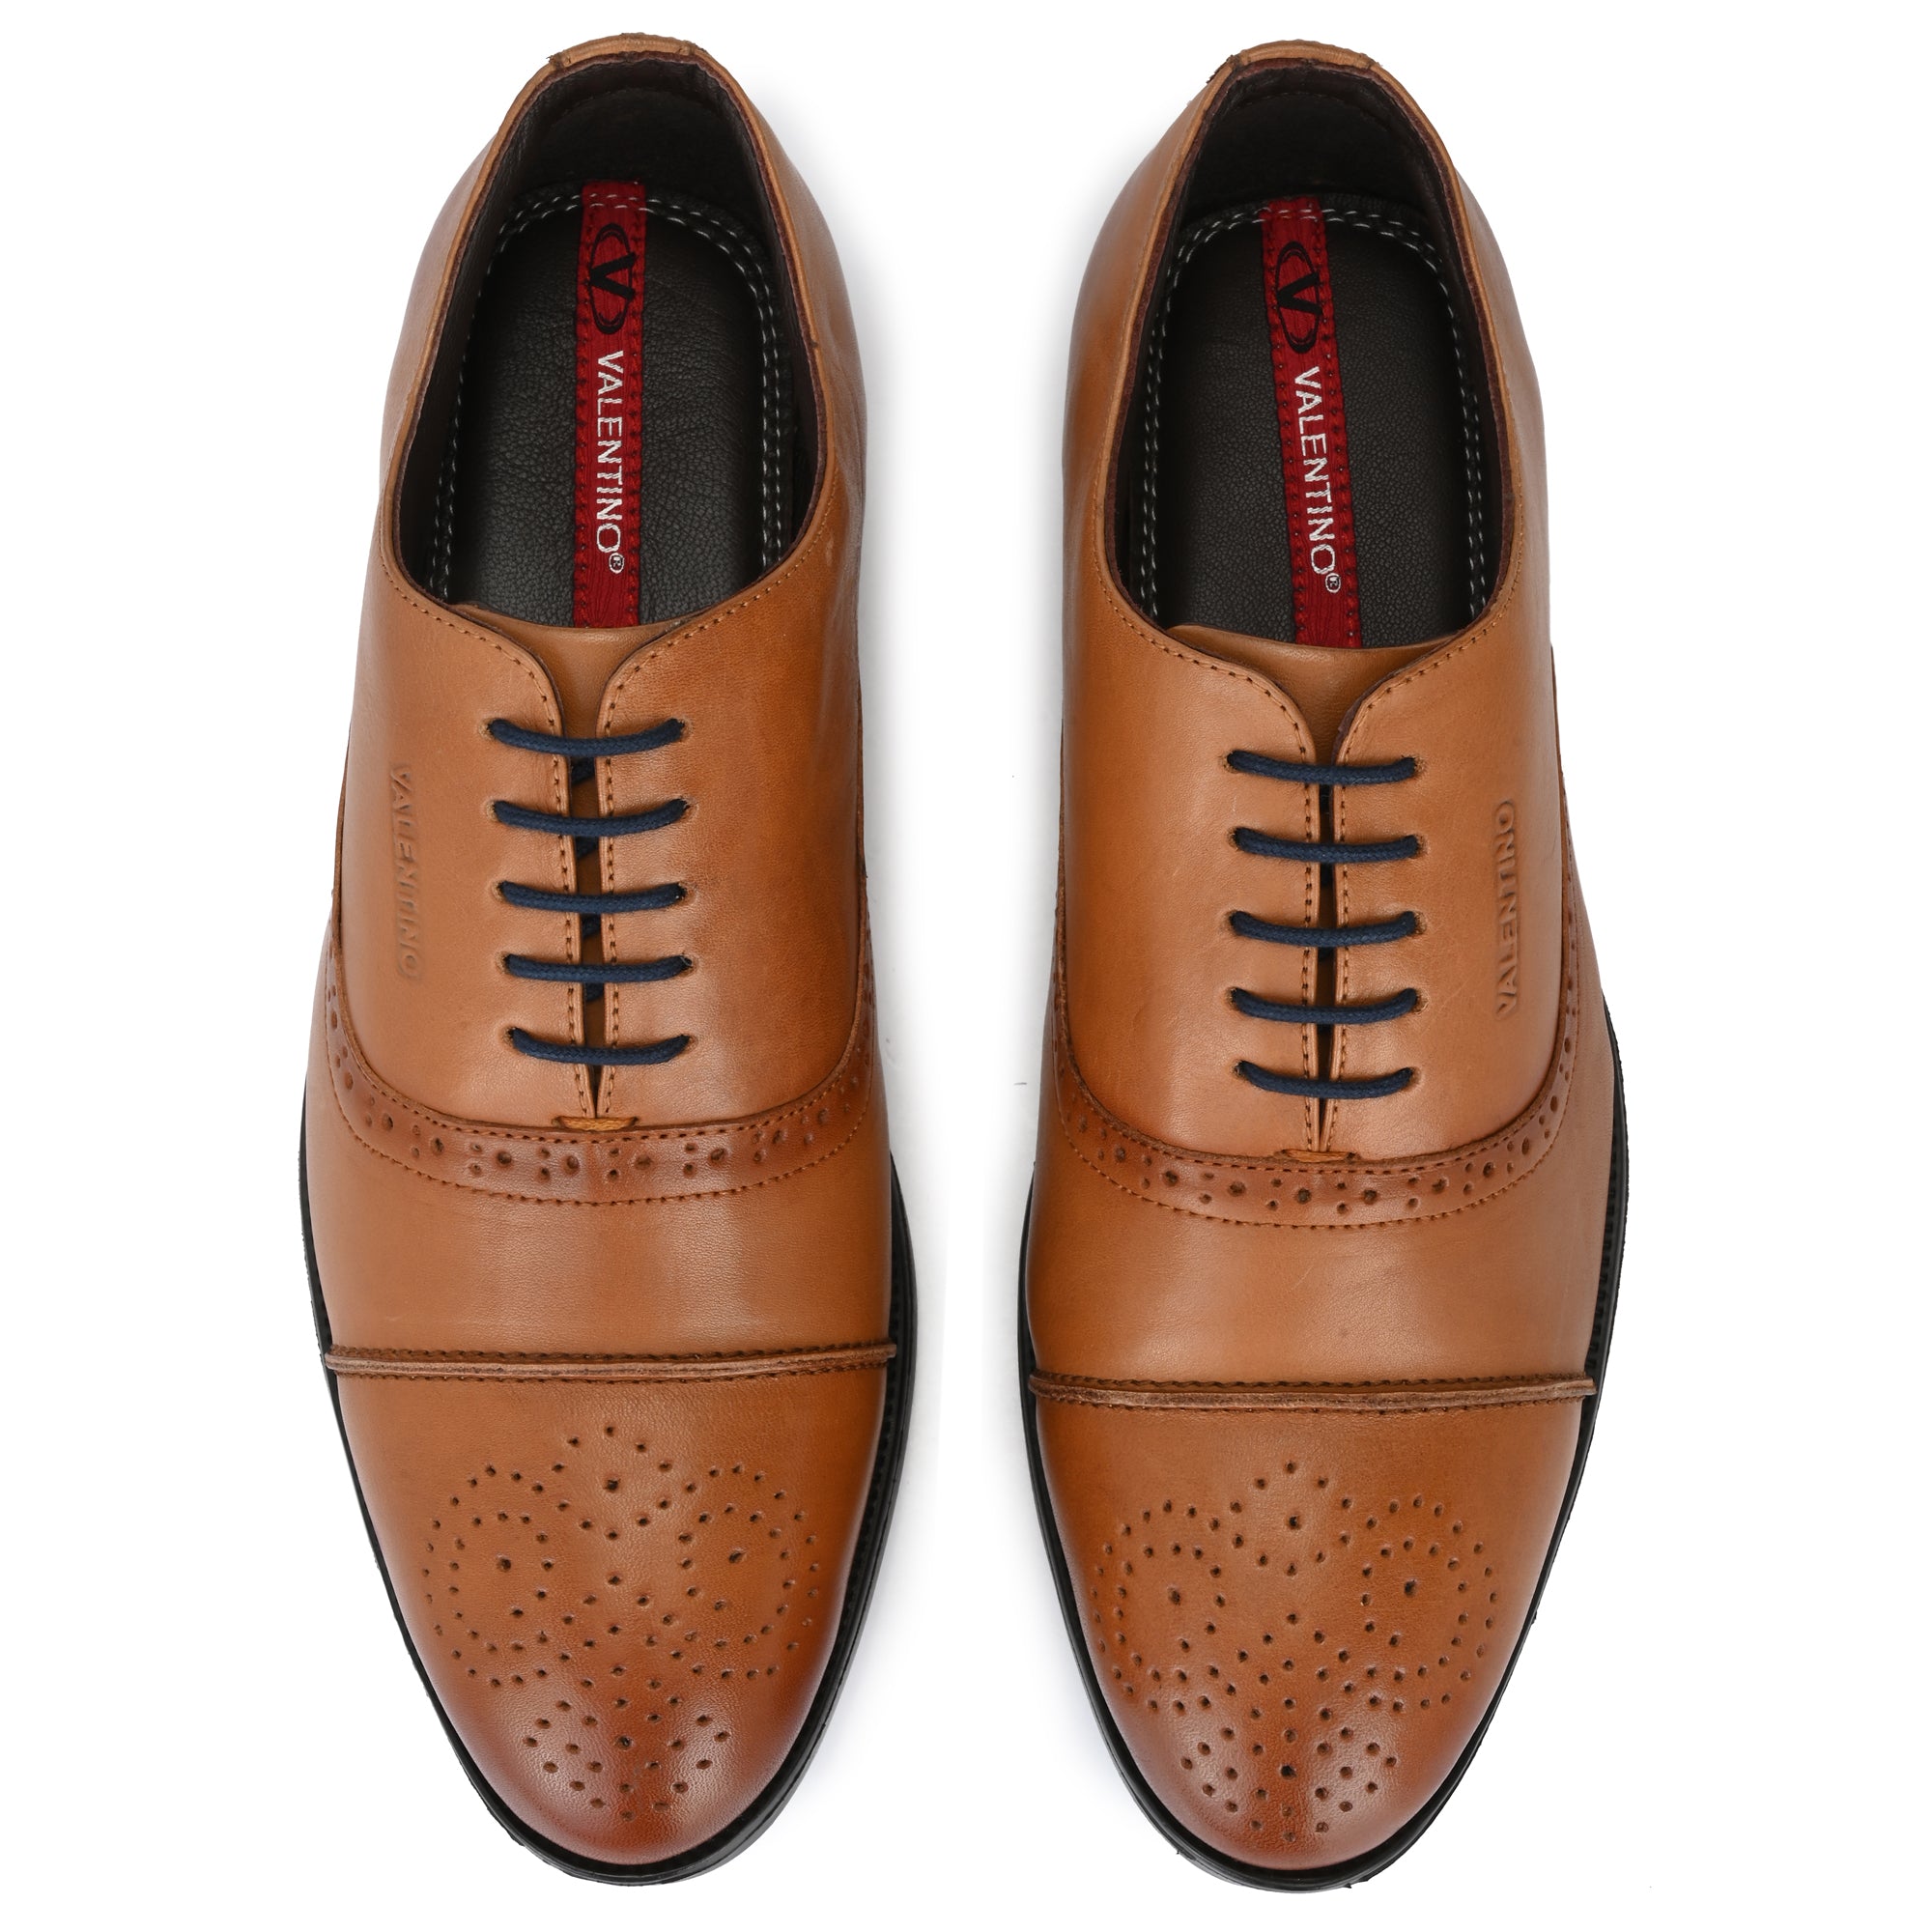 COSMO-65 MEN LEATHER TAN FORMAL LACE UP DERBY